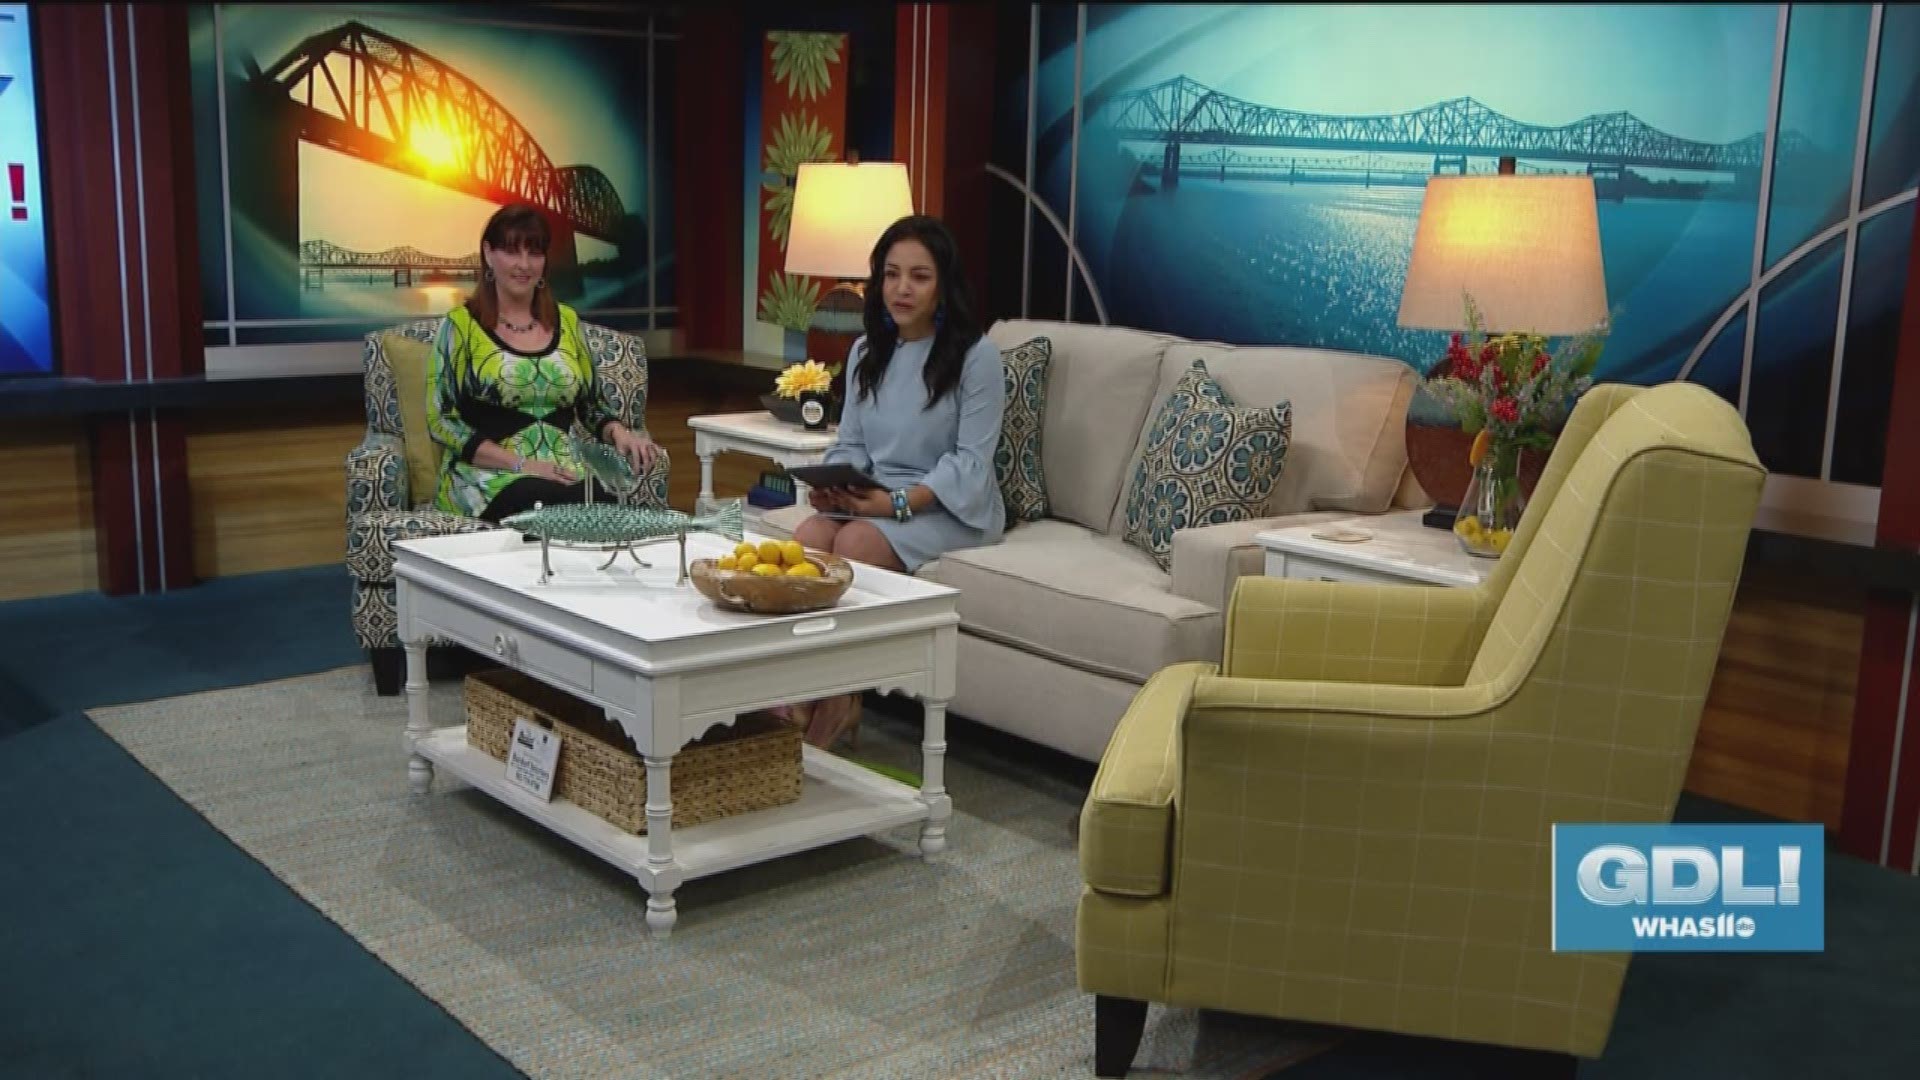 Burdorf Interiors gives the Great Day Live set a makeover every season by providing furniture and styling, and then giving the previous set away to a lucky viewer. Velma Watkins from Burdorf Interiors stopped by Great Day Live for the big reveal. To register for a chance to win, just go to 401 North English Station Road in Louisville, KY.